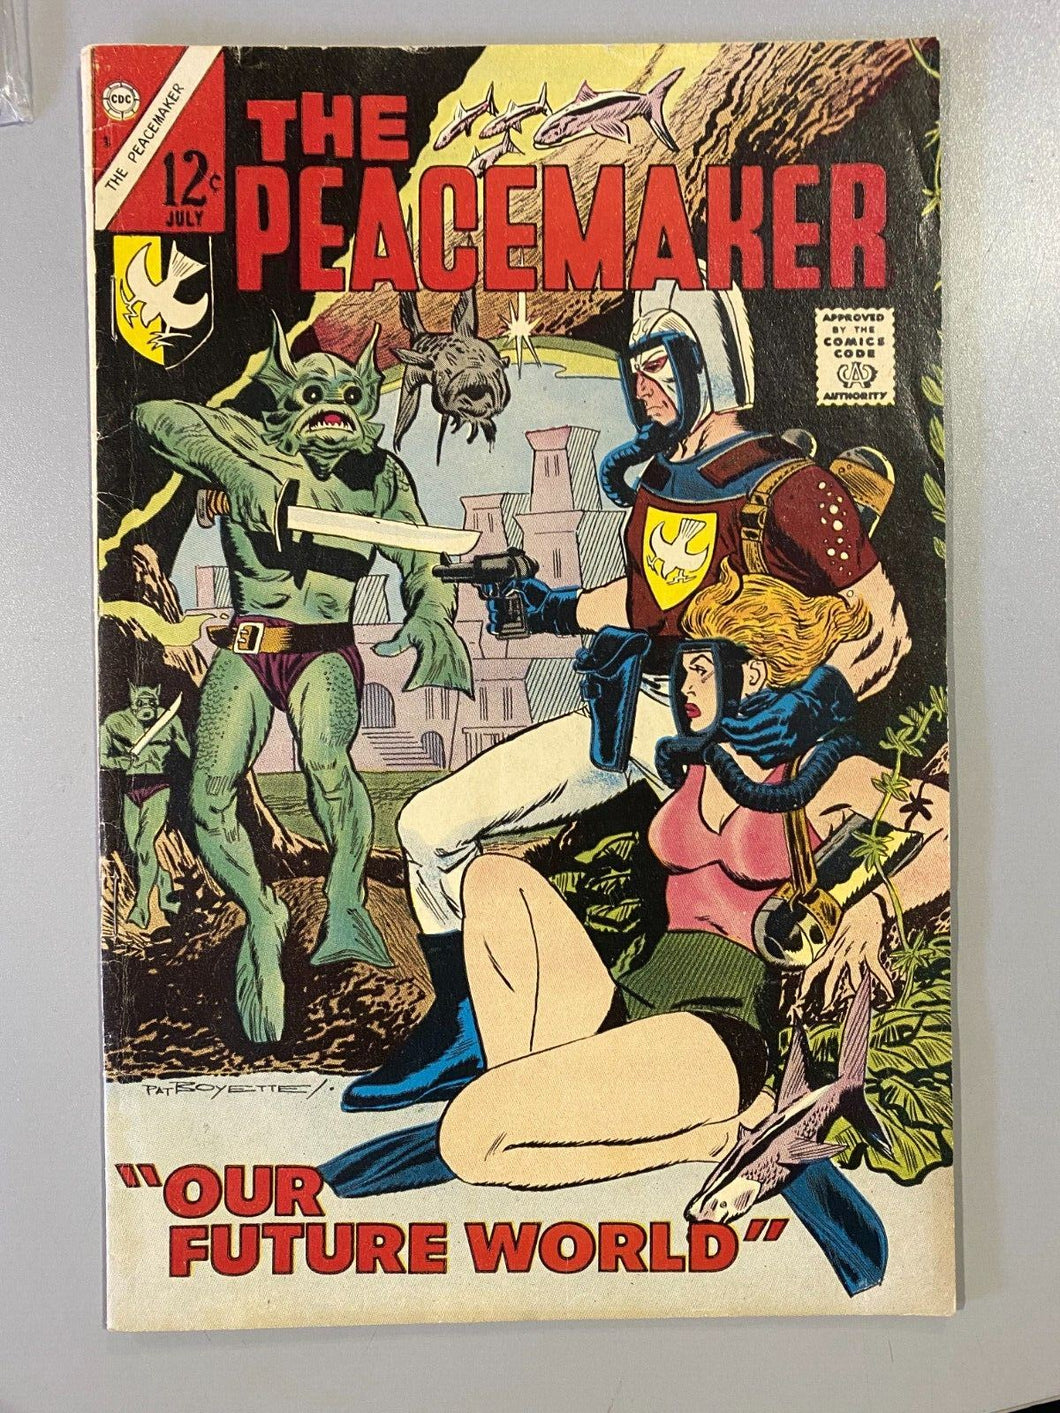 1967 CDC The Peacemaker Issue 3 Vol 3